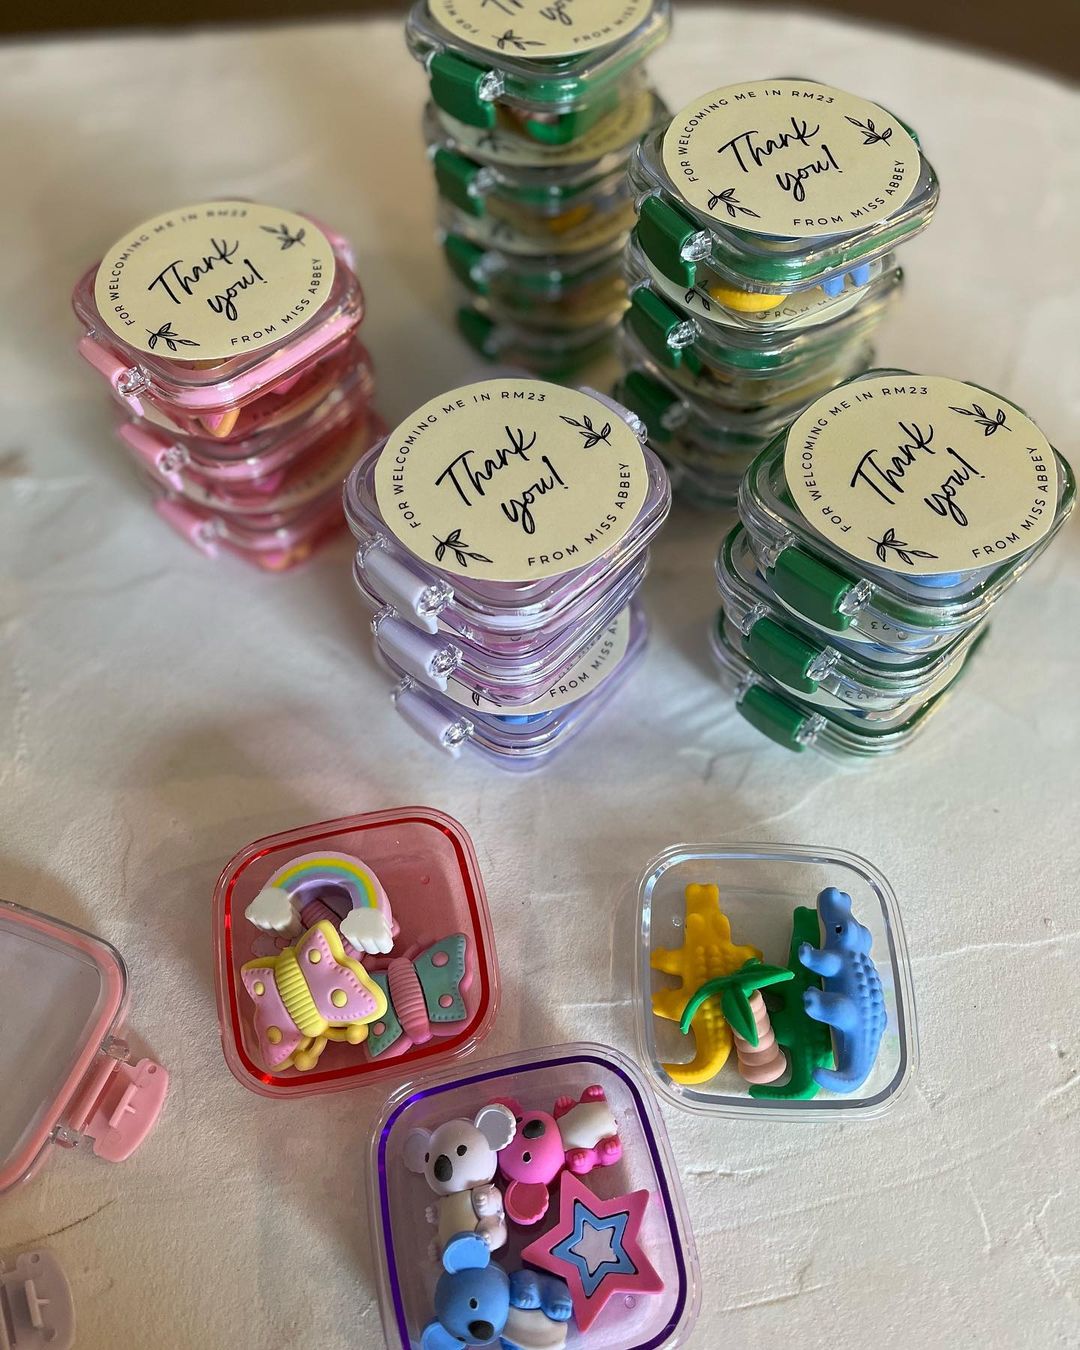 Kmart hacks for teachers: colourful erasers in little plastic containers with a sticker reading 'Thank you!'